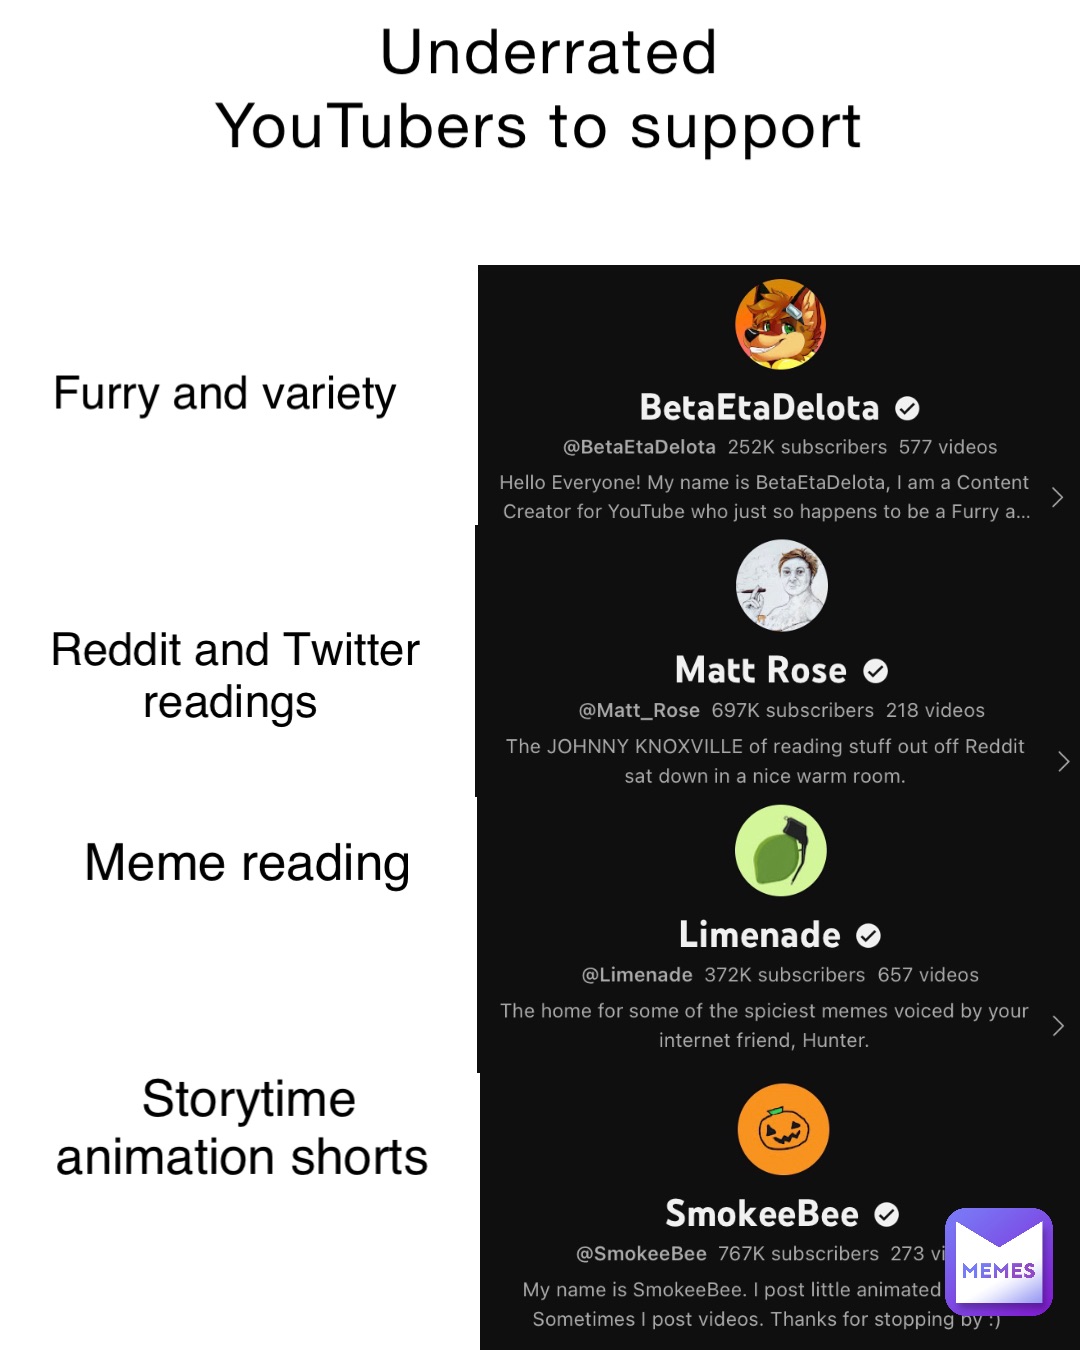 Underrated YouTubers to support Furry and variety Reddit and Twitter readings Meme reading Storytime animation shorts